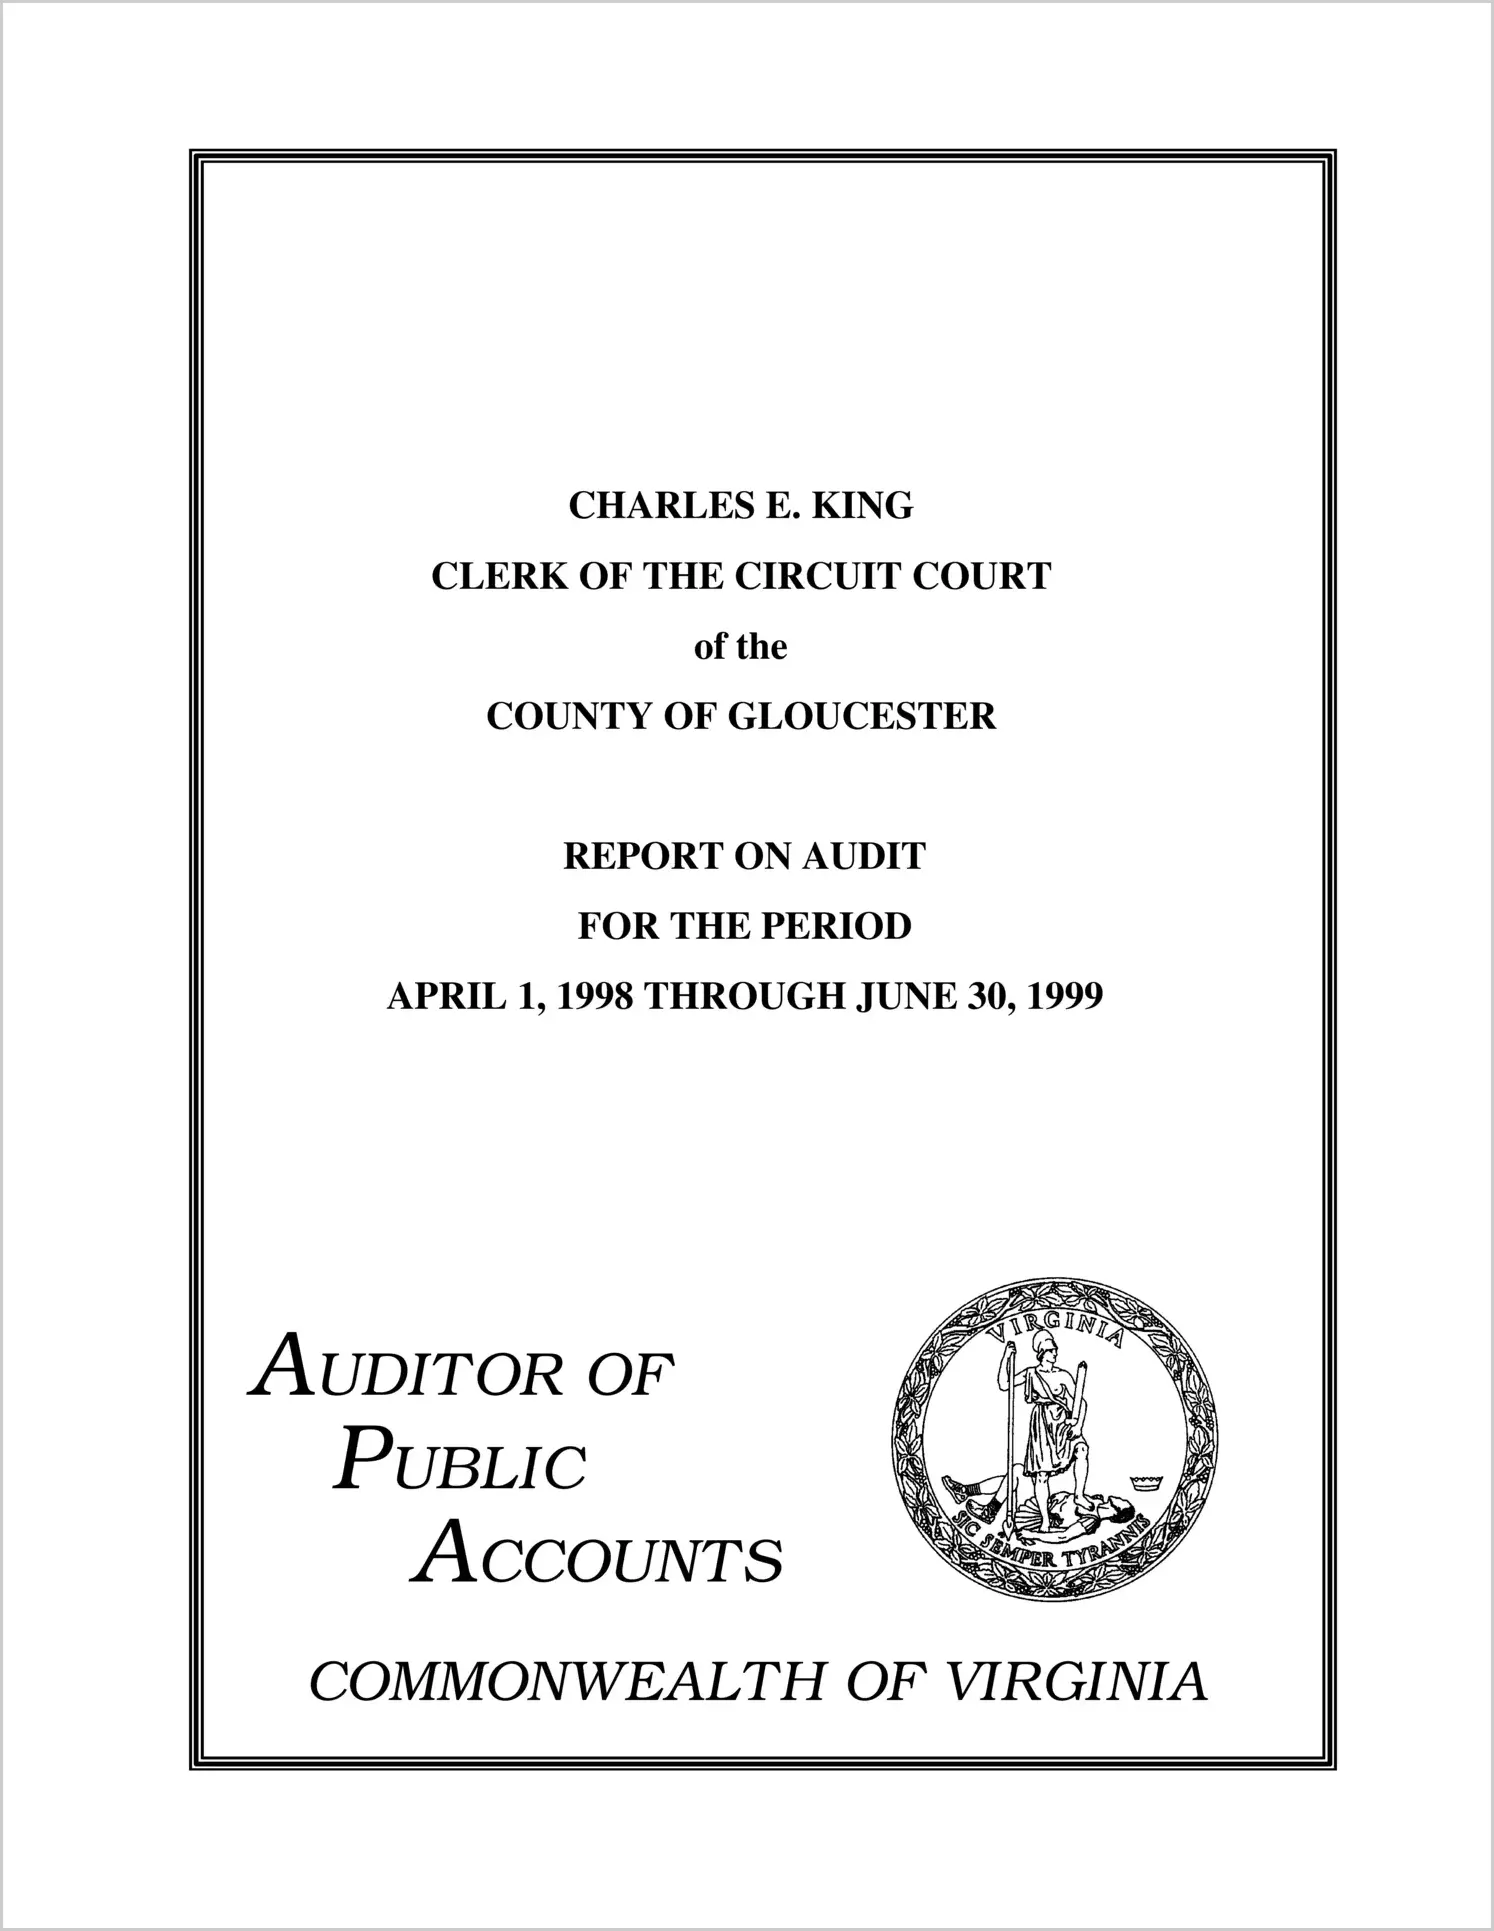 Clerk of the Circuit Court of the County of Gloucester for the period April 1, 1998 through June 30, 1999